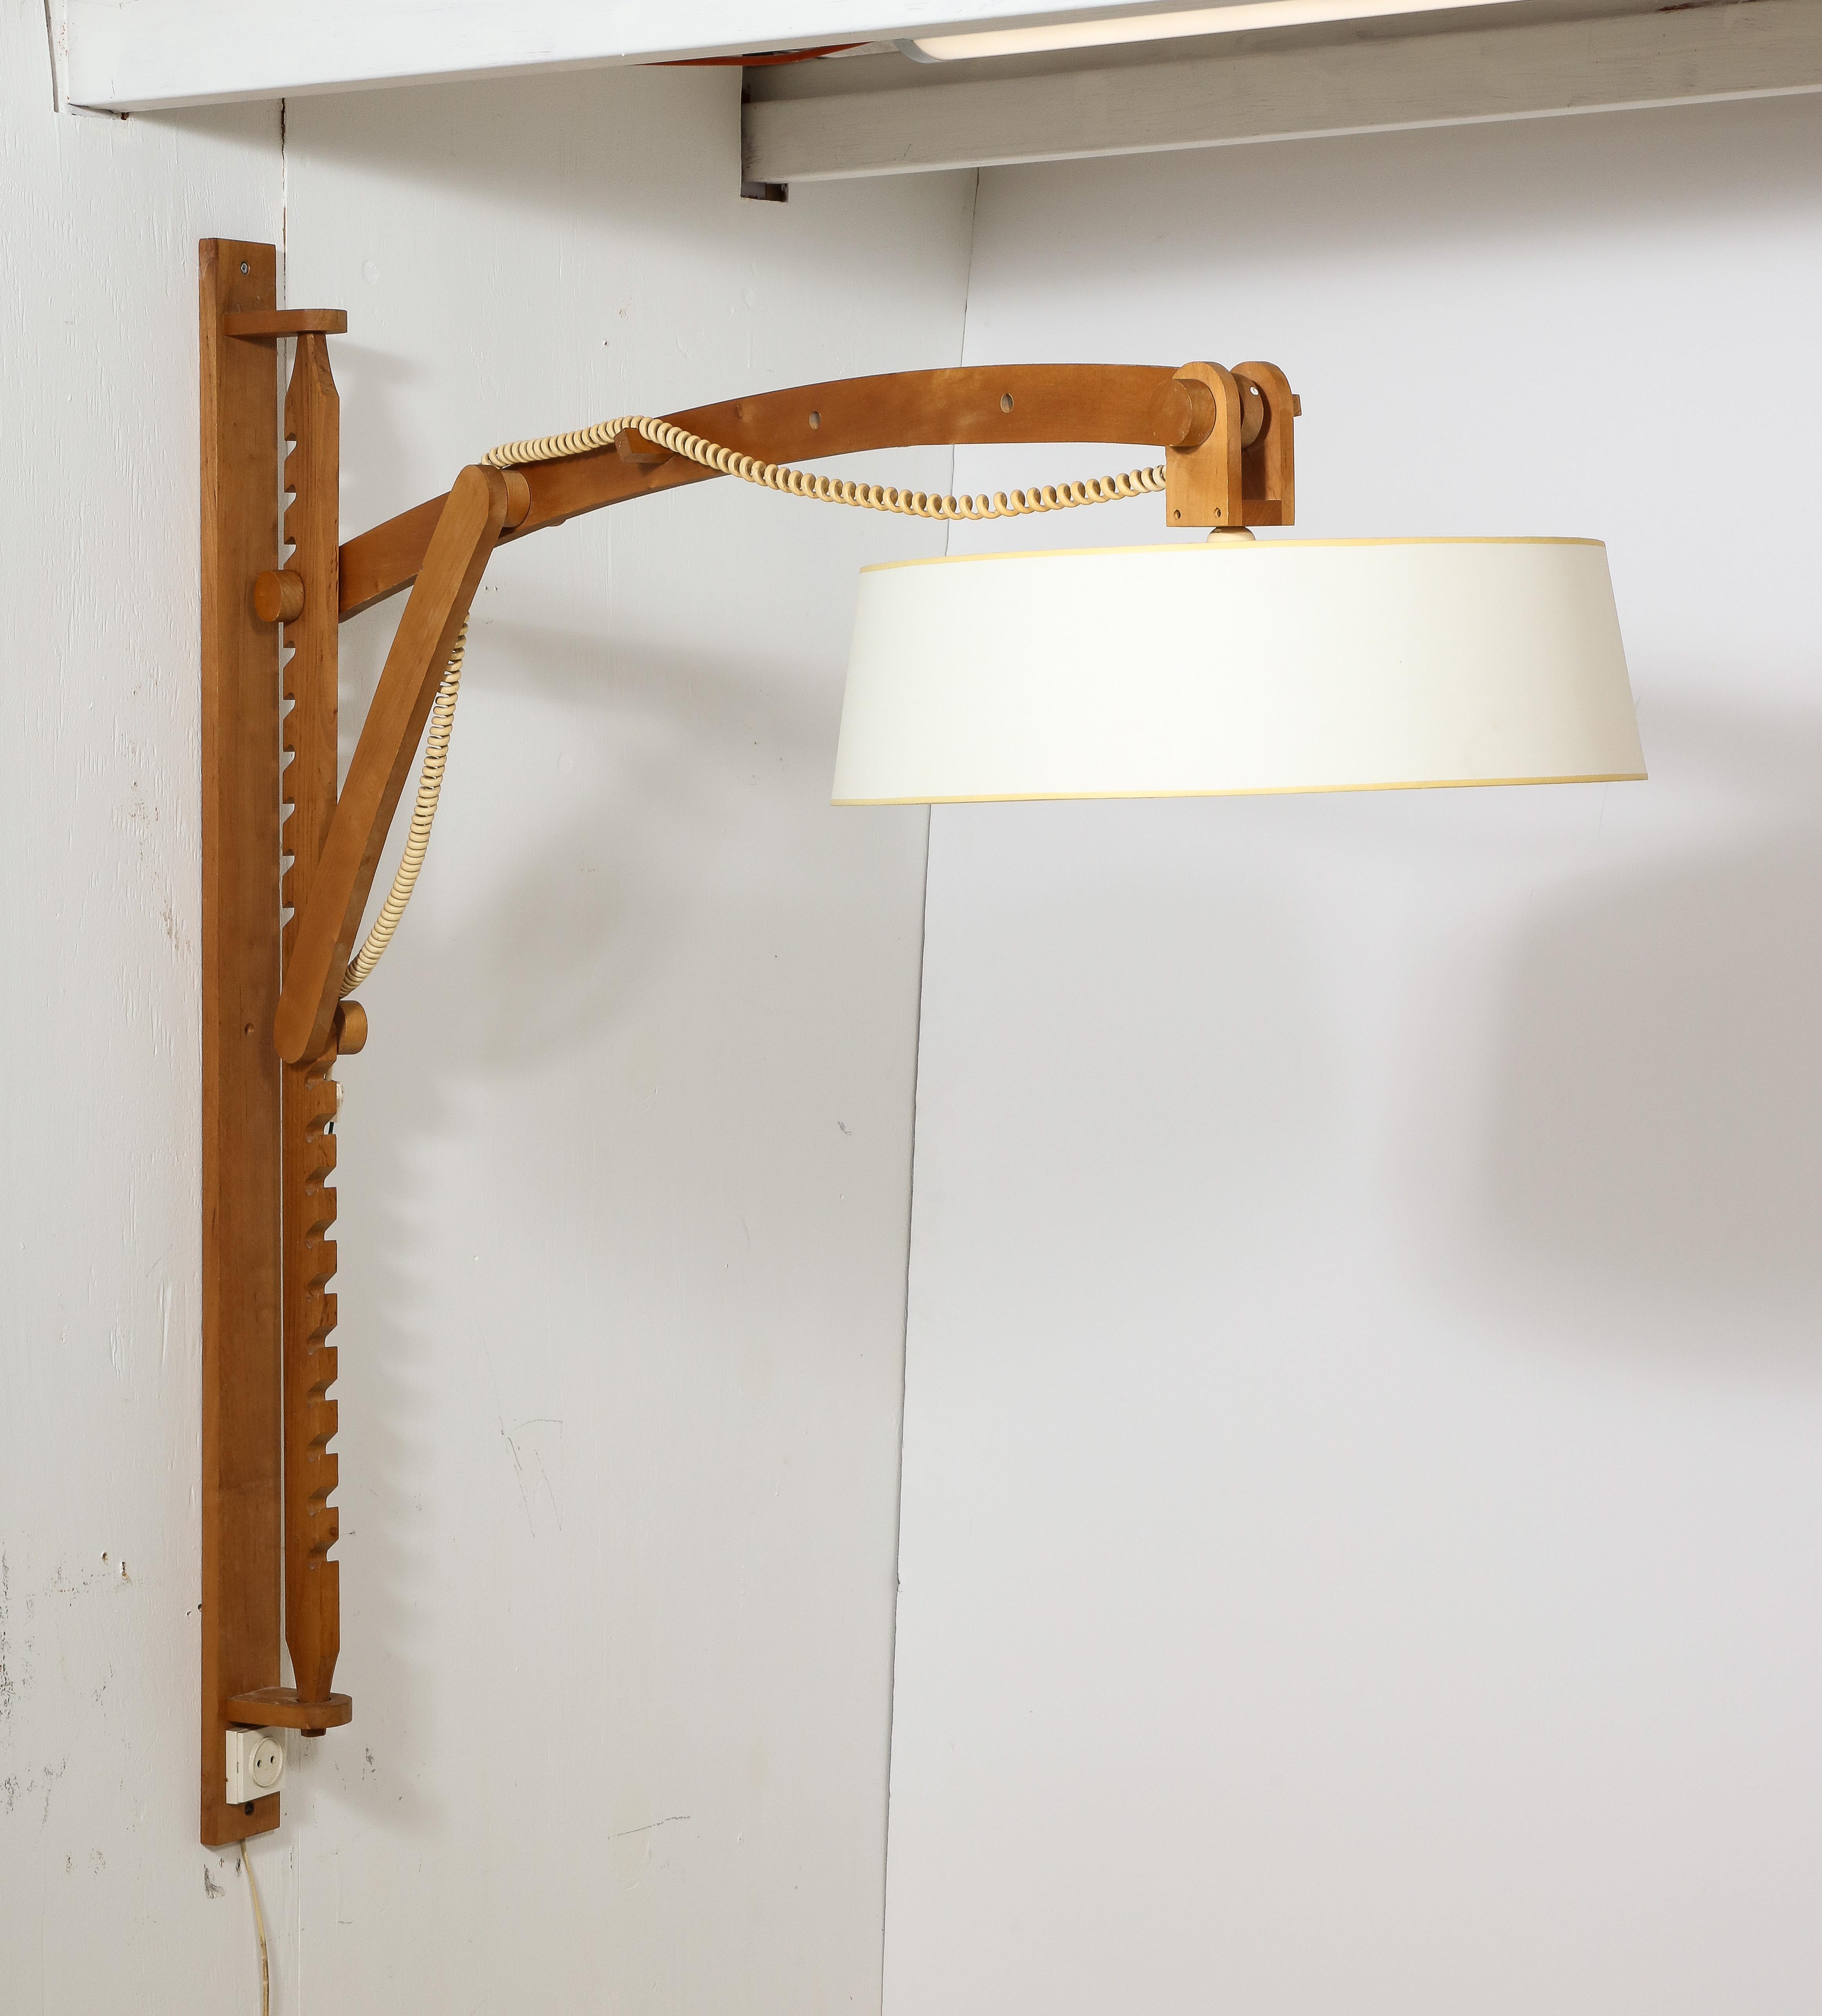 Very large solid pine adjustable wall light fixture.
Pair available

55x65x8